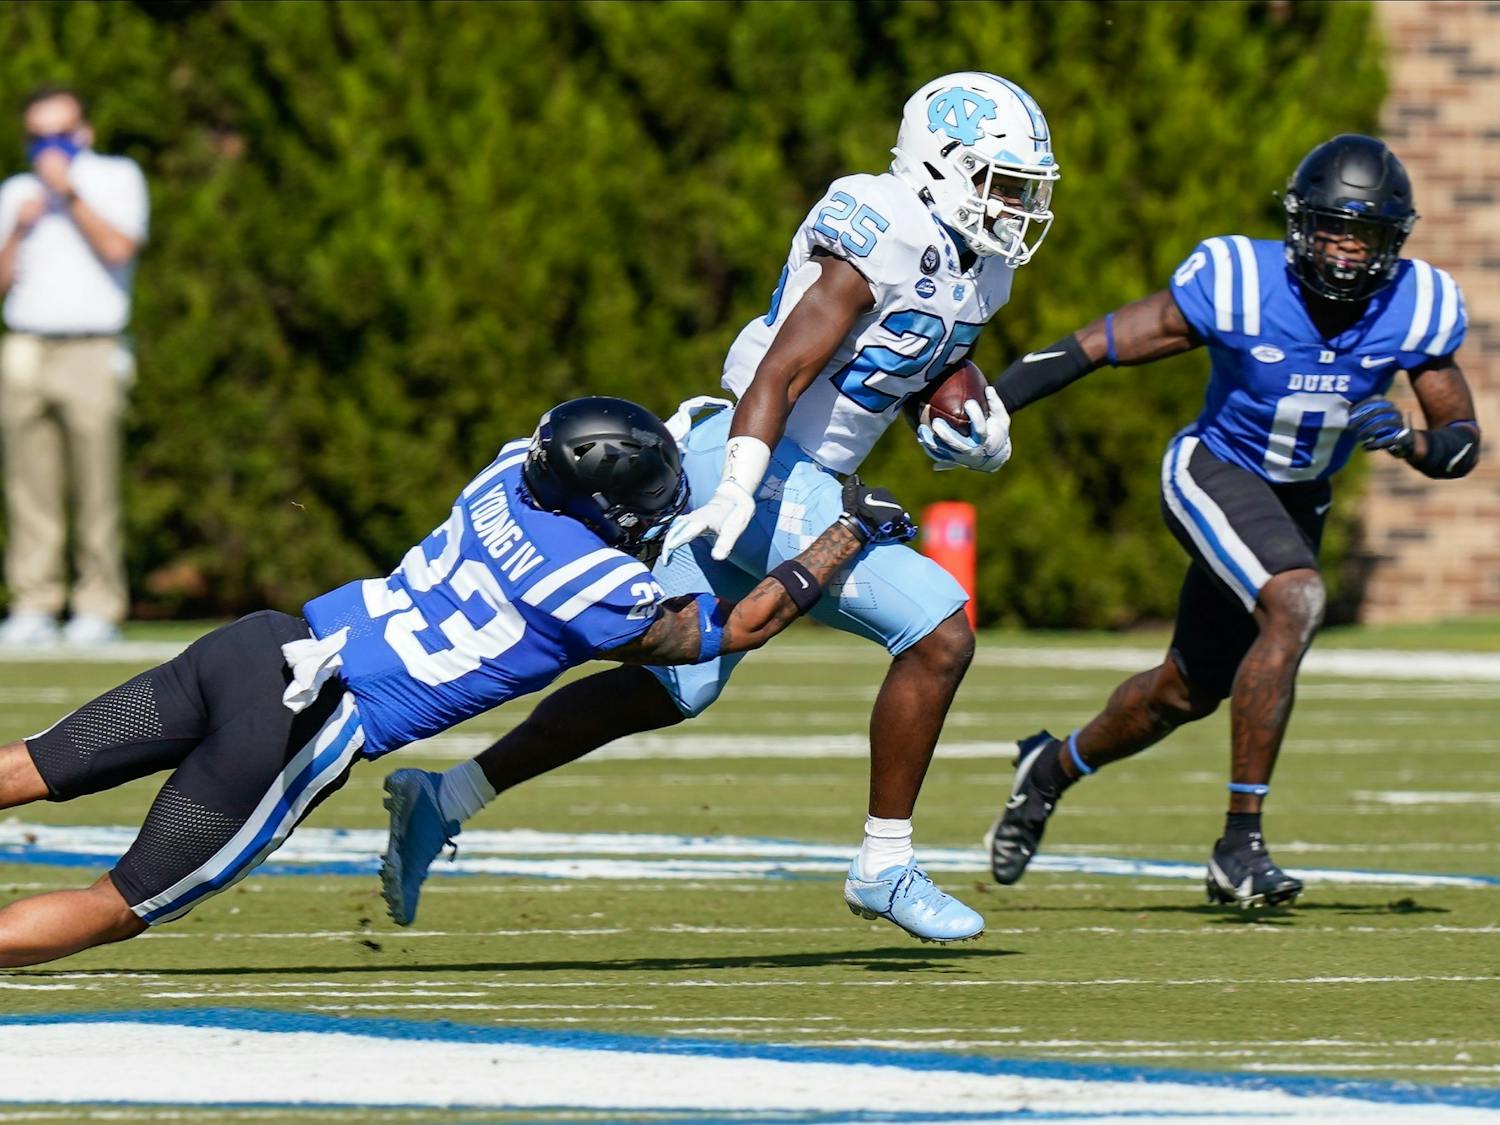 UNC running back Javonte Williams (25) runs for yardage tackled by Duke safety Lummie Young IV (23) and safety Marquis Waters (0) during the first quarter at Wallace Wade Stadium. Photo courtesy of Jim Dedmon-USA TODAY Sports